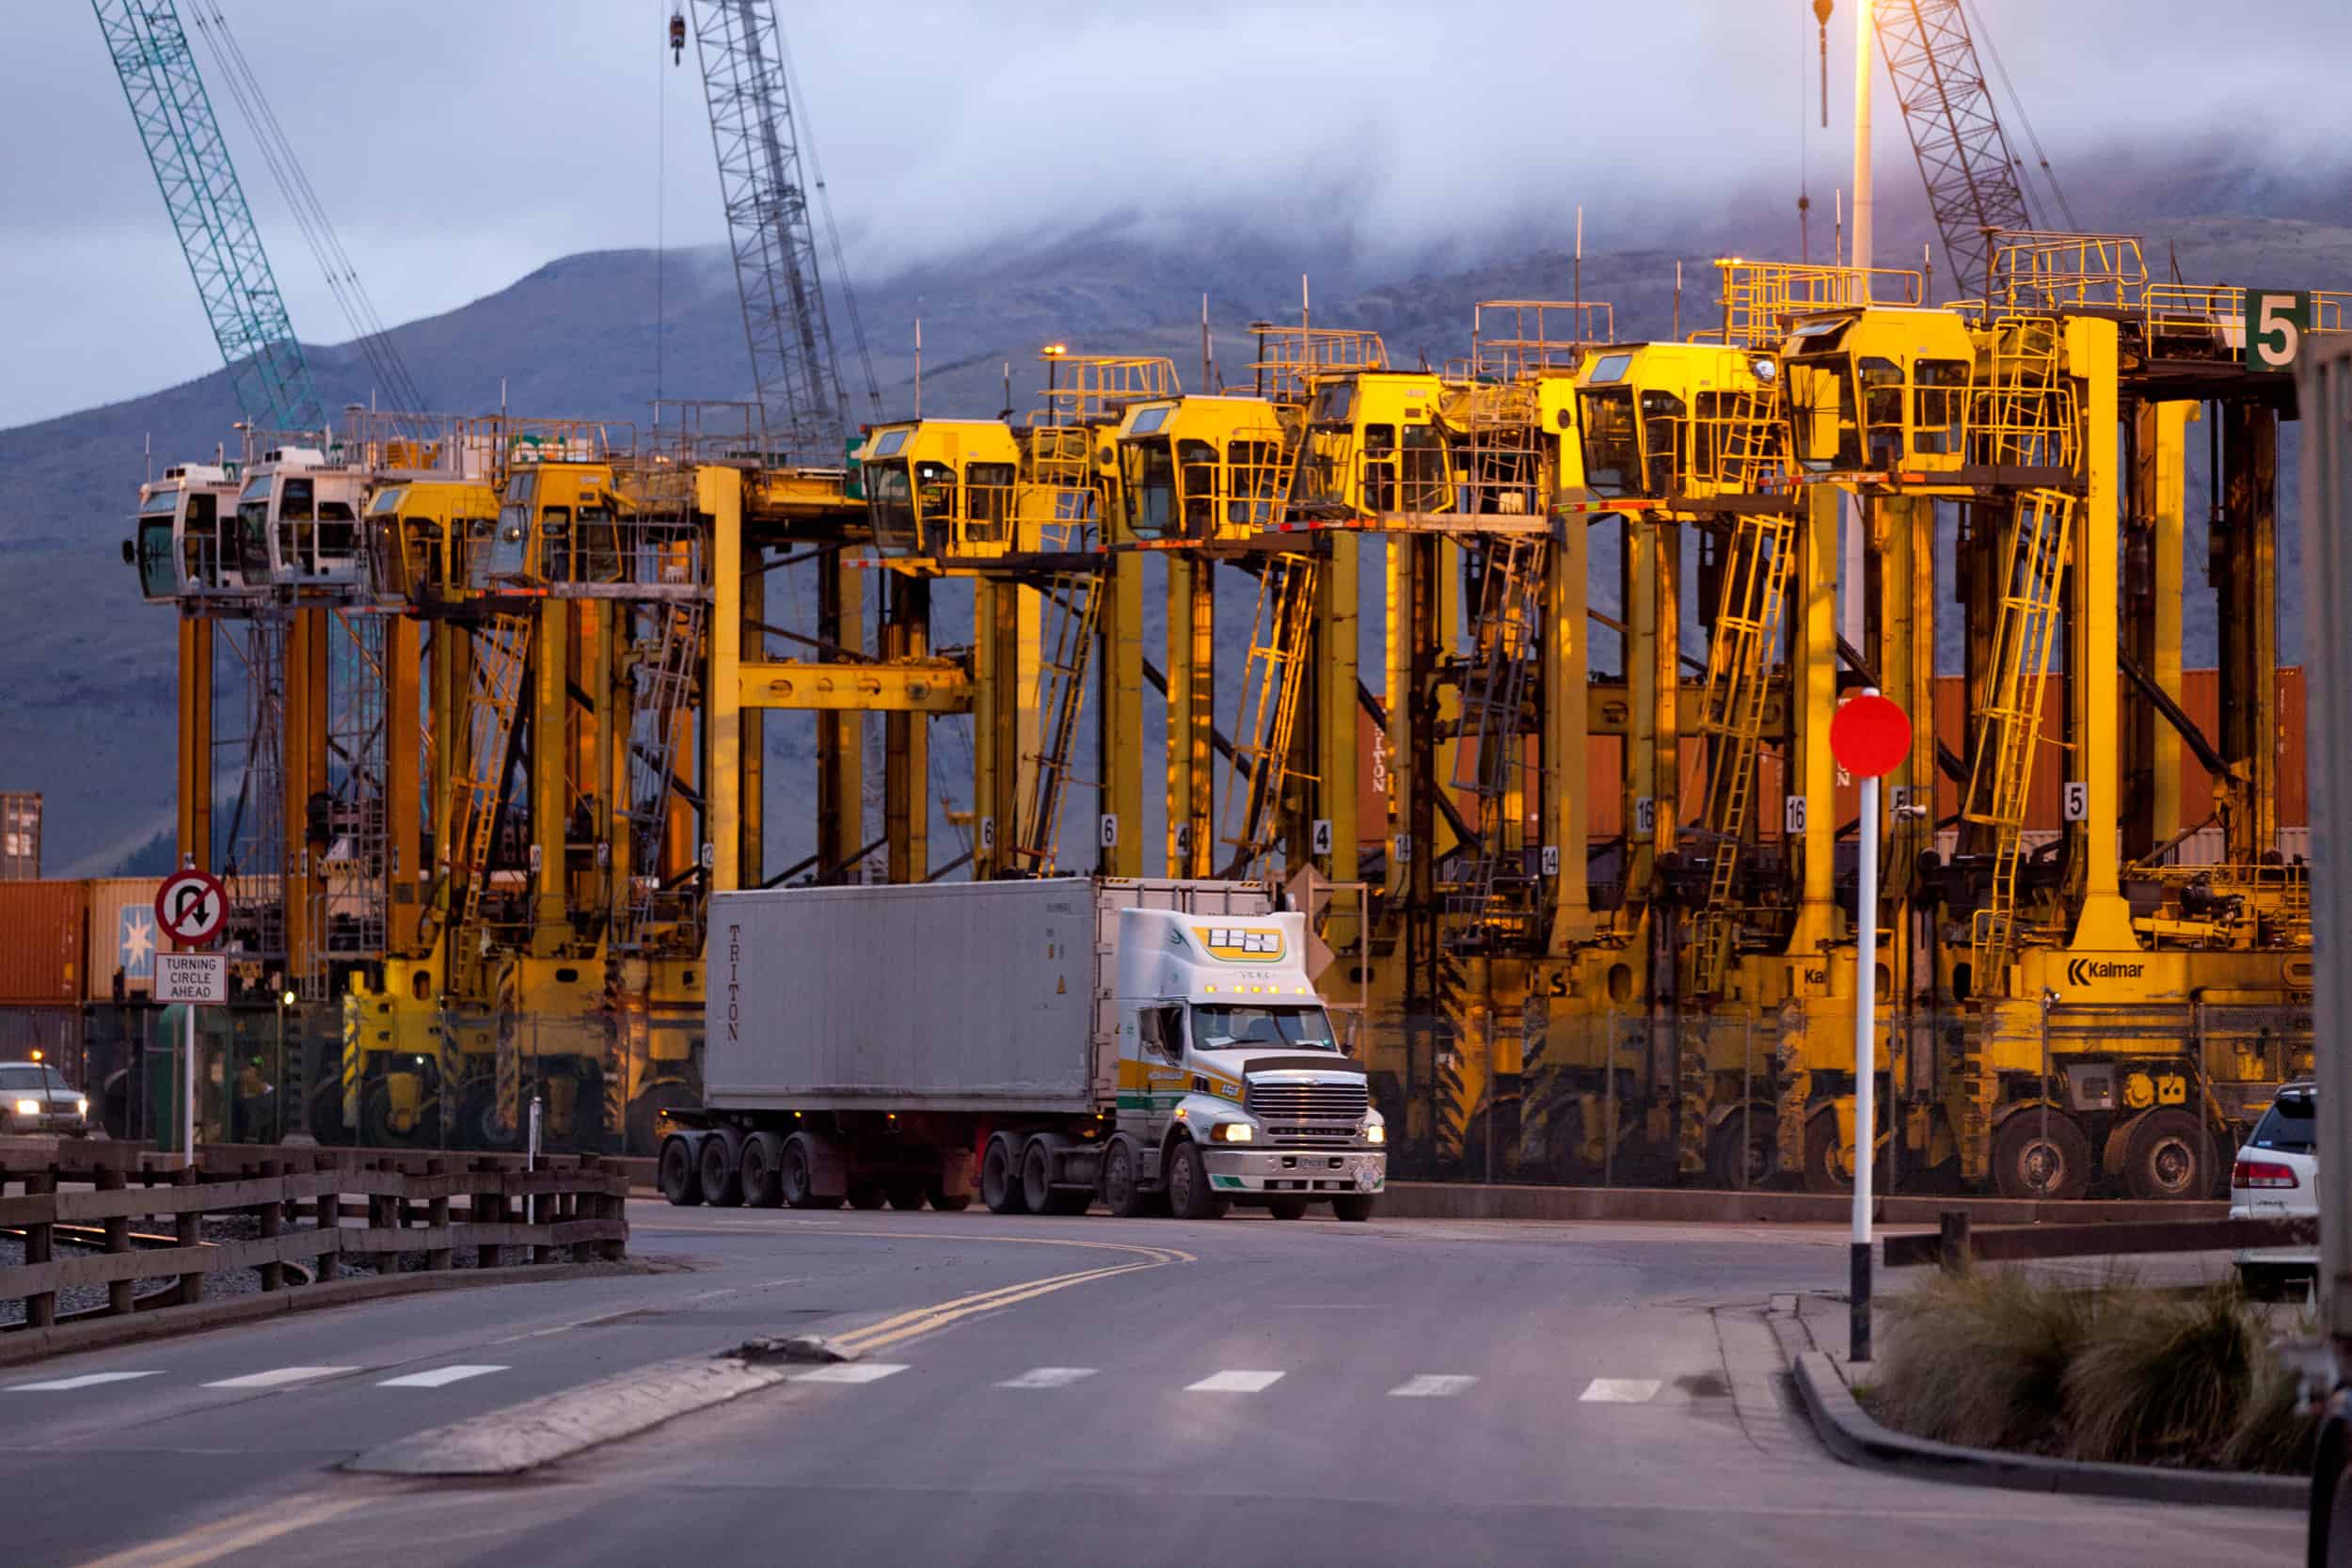 Hilton Haulage truck with container passes straddles at Port of Lyttelton.